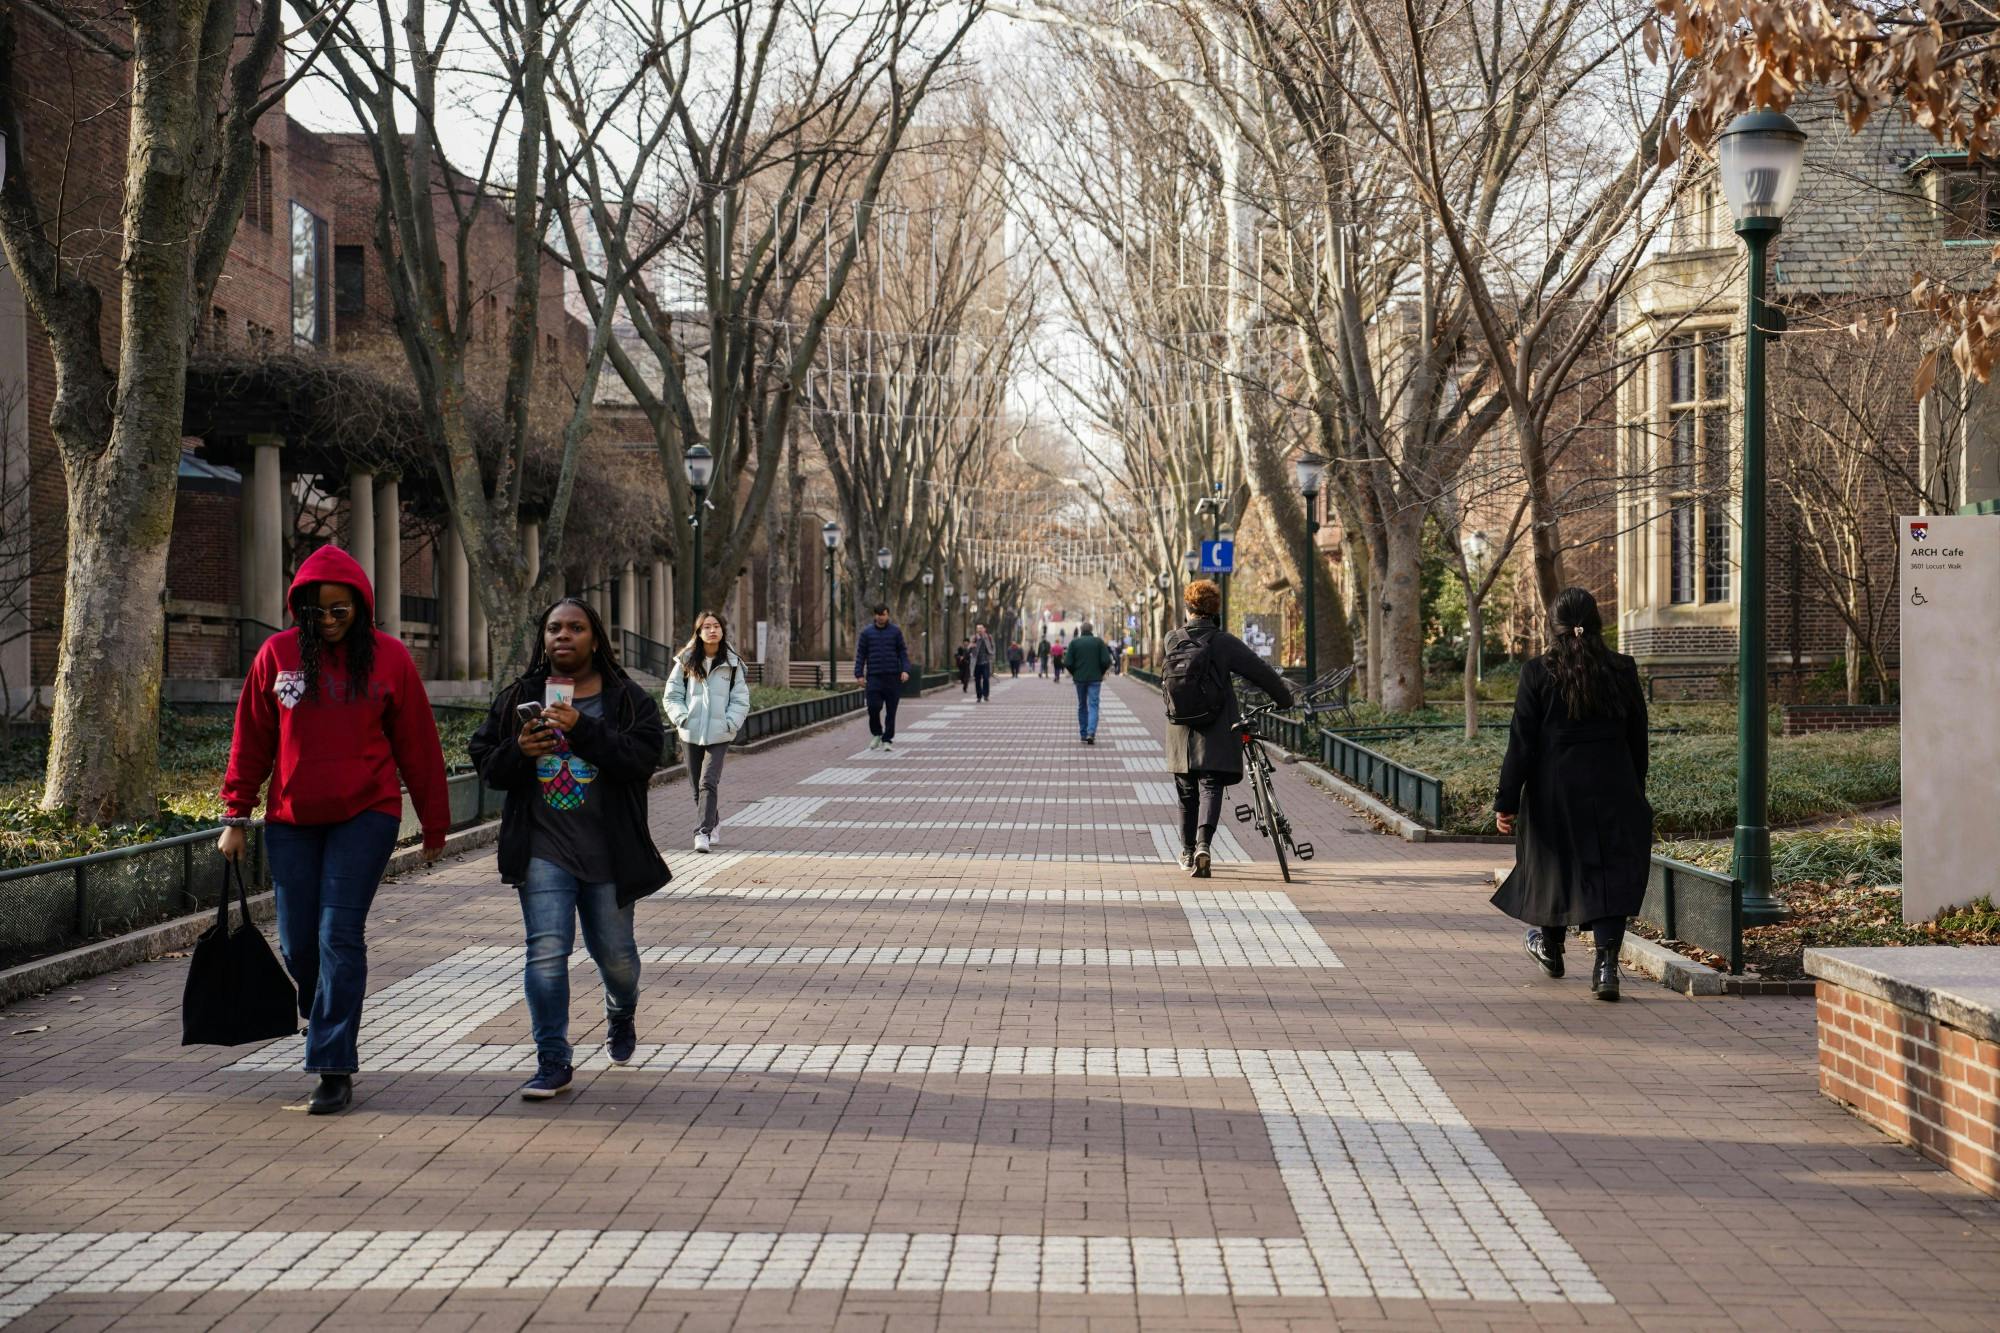 Penn has shortest breaks among Ivy League and local universities, DP analysis finds